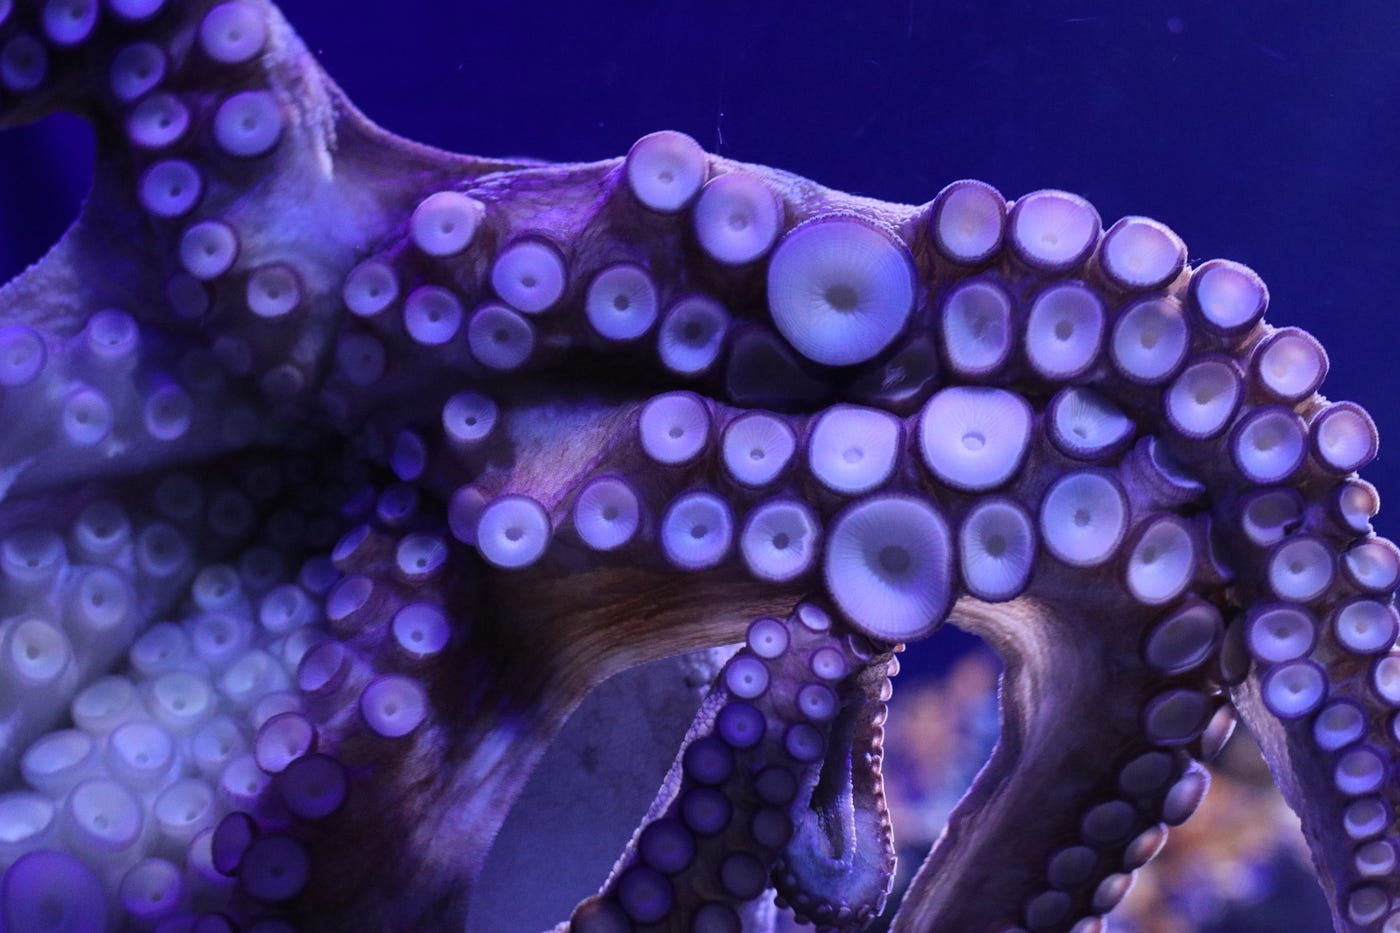 Octopuses Use Their Tentacles to Feel Light, by Simon Spichak, Predict